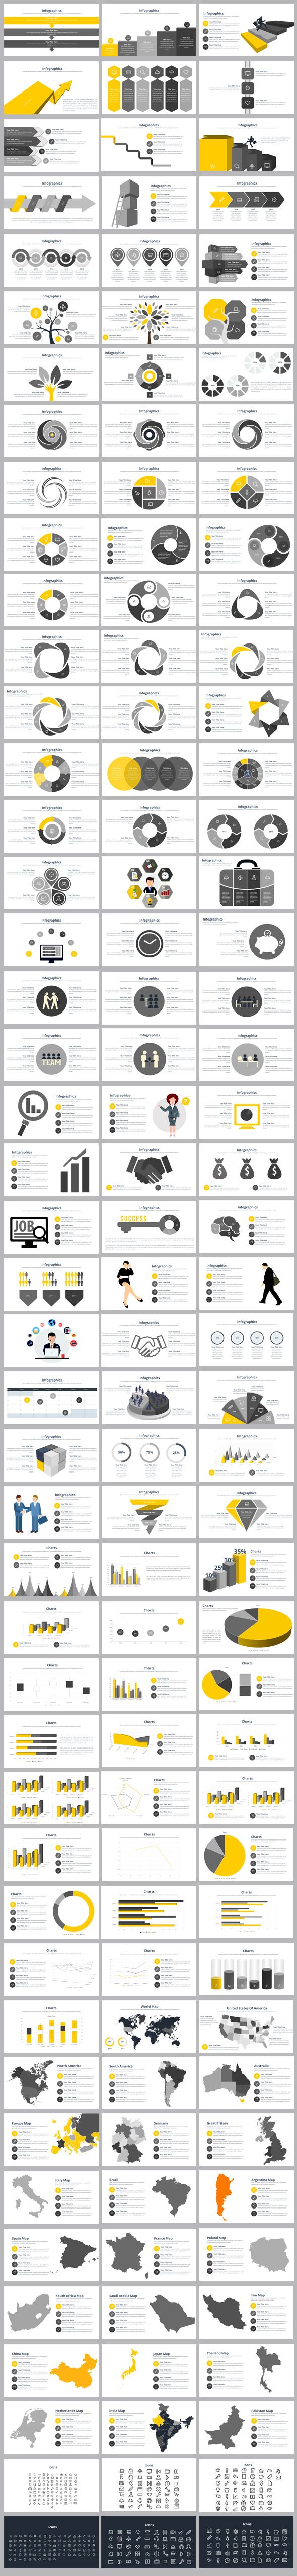 Business Strategy Powerpoint Templates Bundle - 3